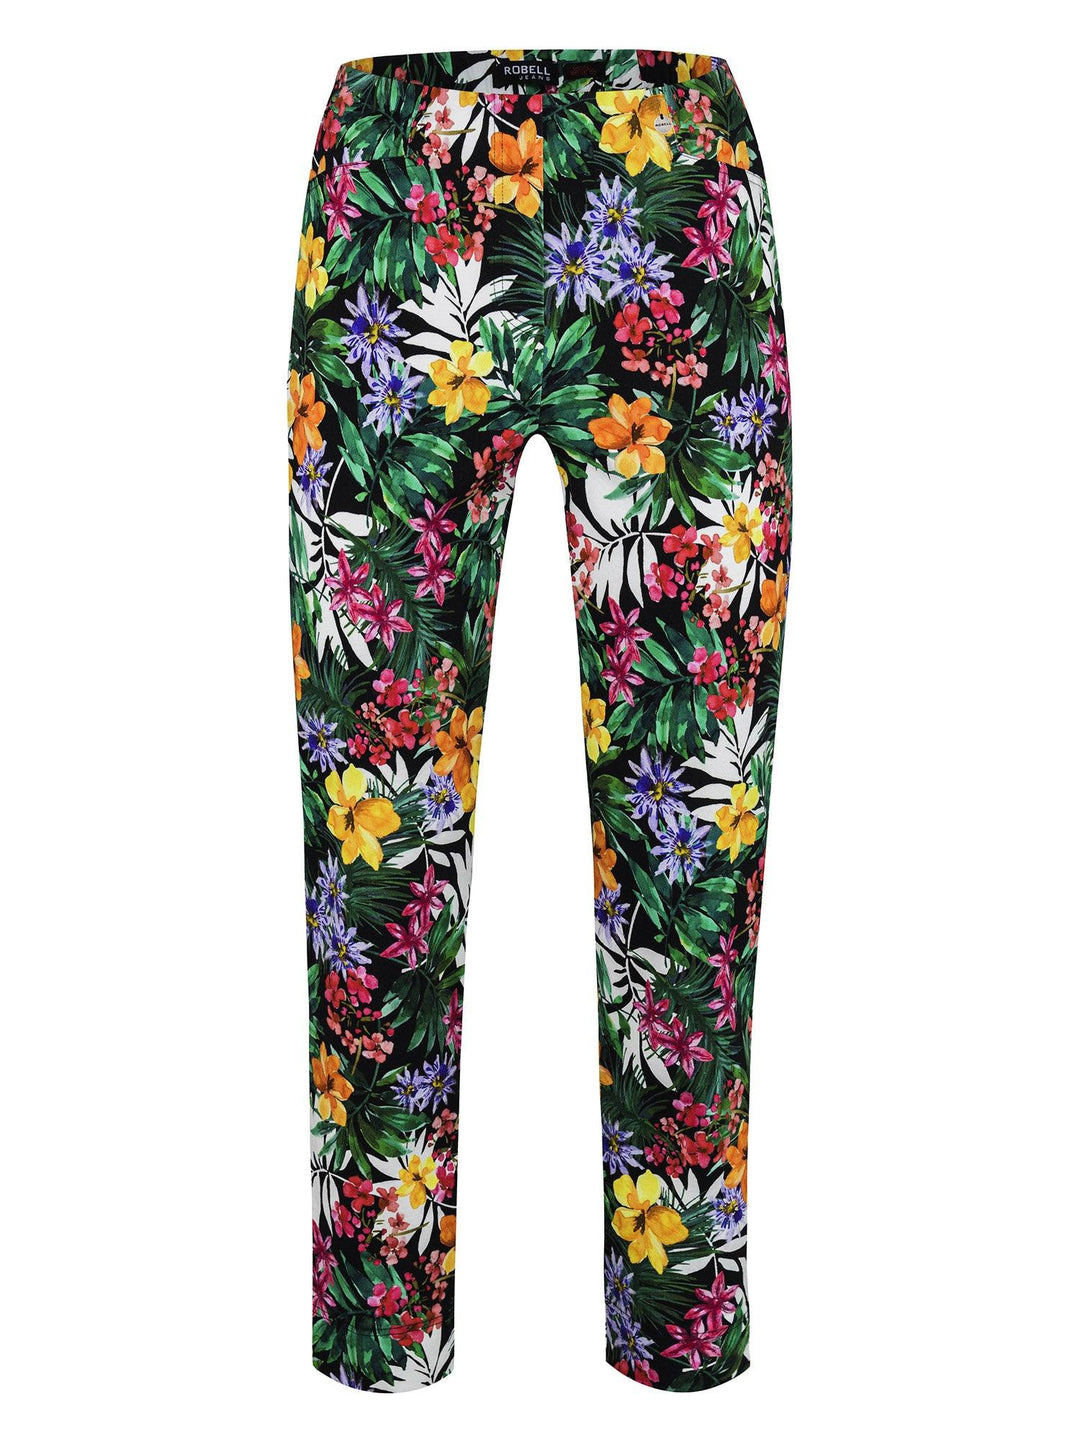 Robell Rose 09 – 7/8 Tropical Print Cropped Jean 51630-54858-90 - Trouser Print, Trouser ginasmartboutique